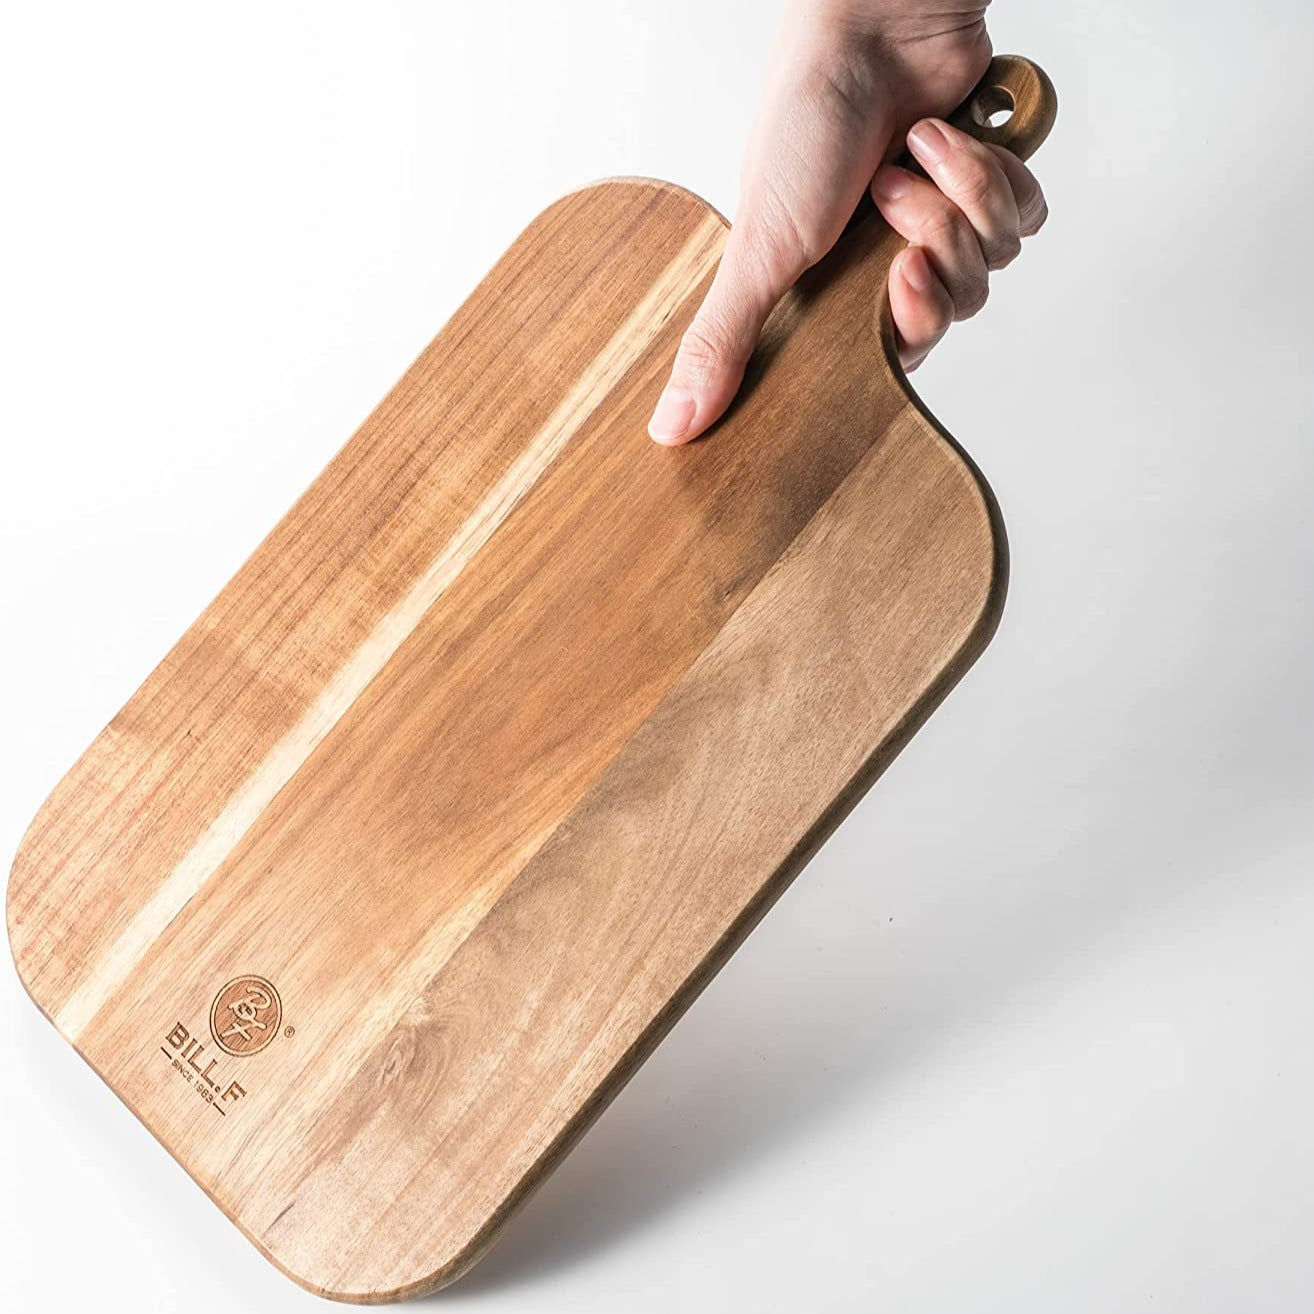 Best Acacia Wood Cutting Board with Handle Wooden Charcuterie Board Kitchen  Chopping Boards for Bread Meat Cutting boards Fruit Cheese Serving Board